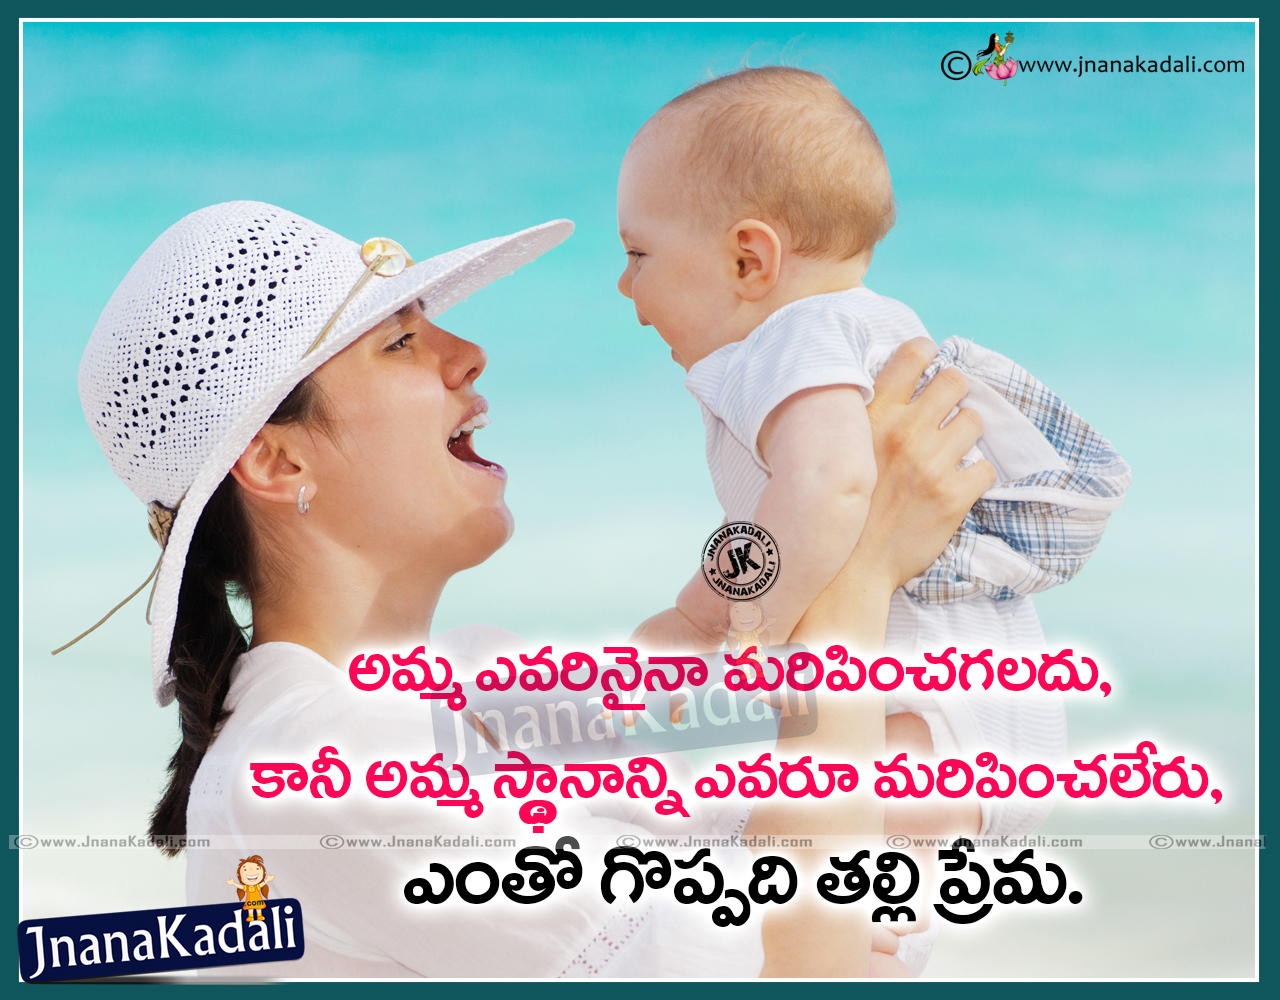 I Love You Amma Telugu Mother Quotes Garden With Hd - Toddler - 1280x1000  Wallpaper 